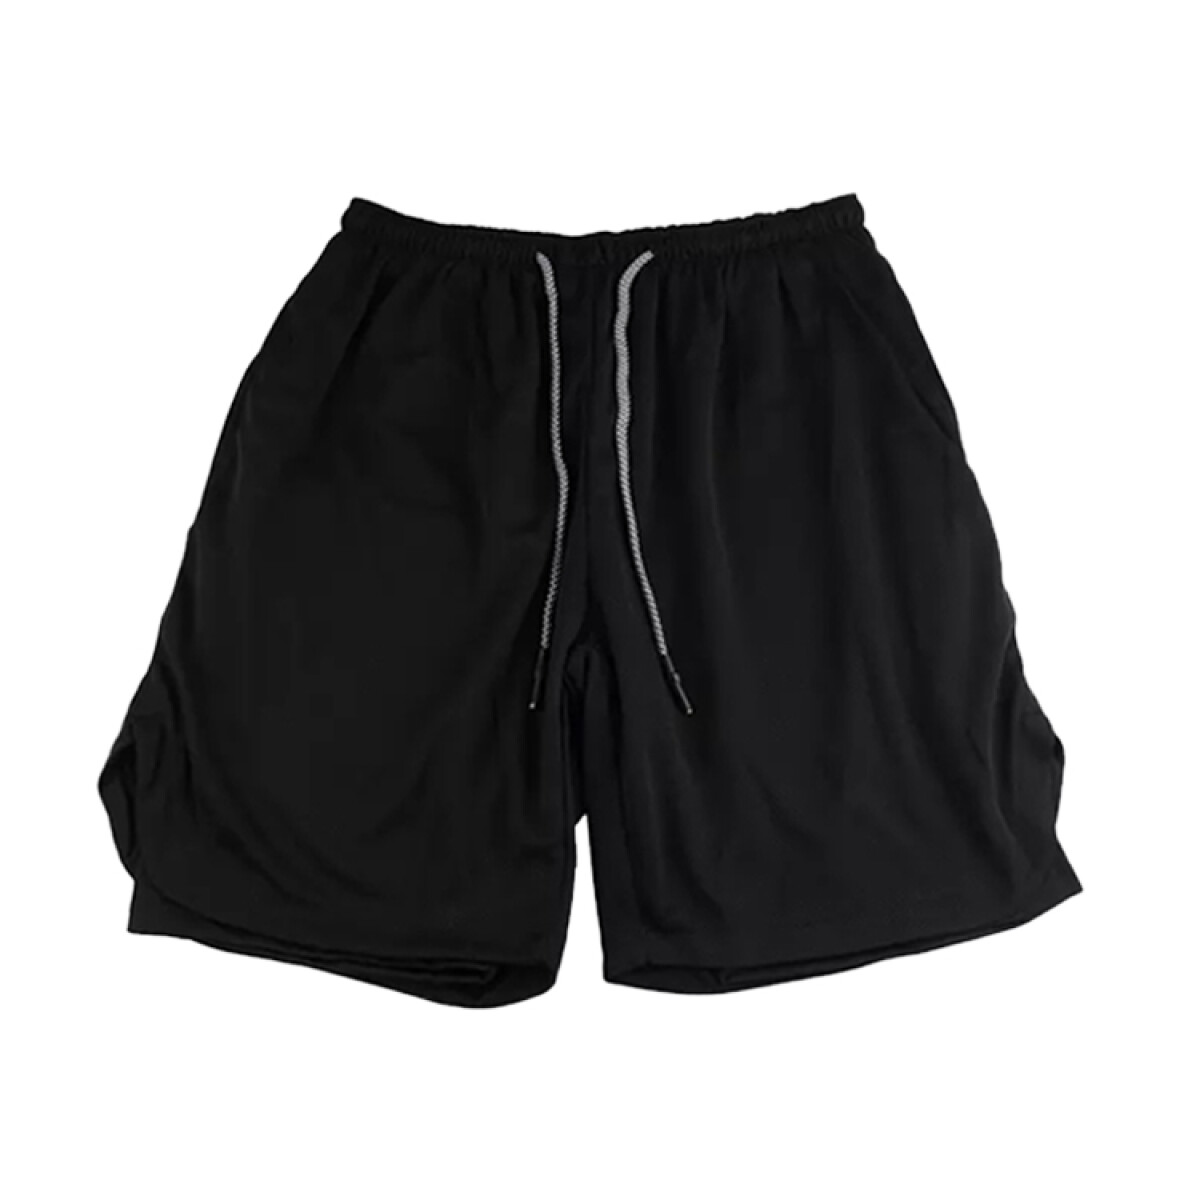 Shorts Fitness Para Hombre Talle L 